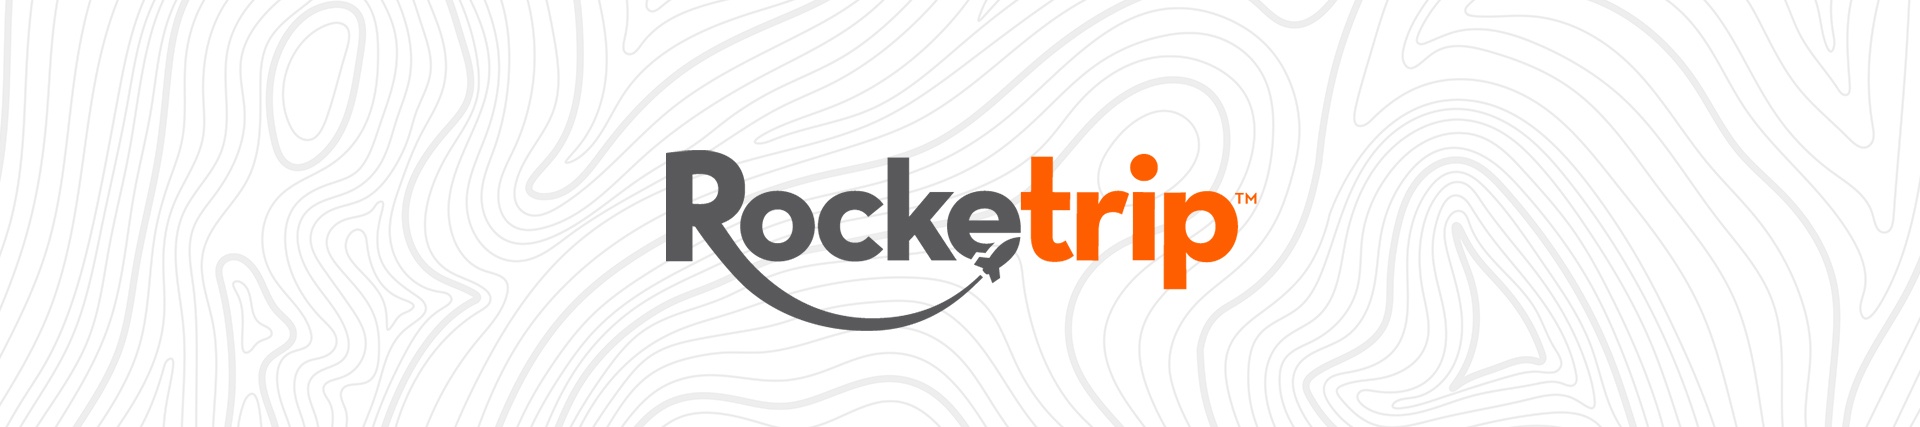 Direct Travel Partnered with Rockettrip